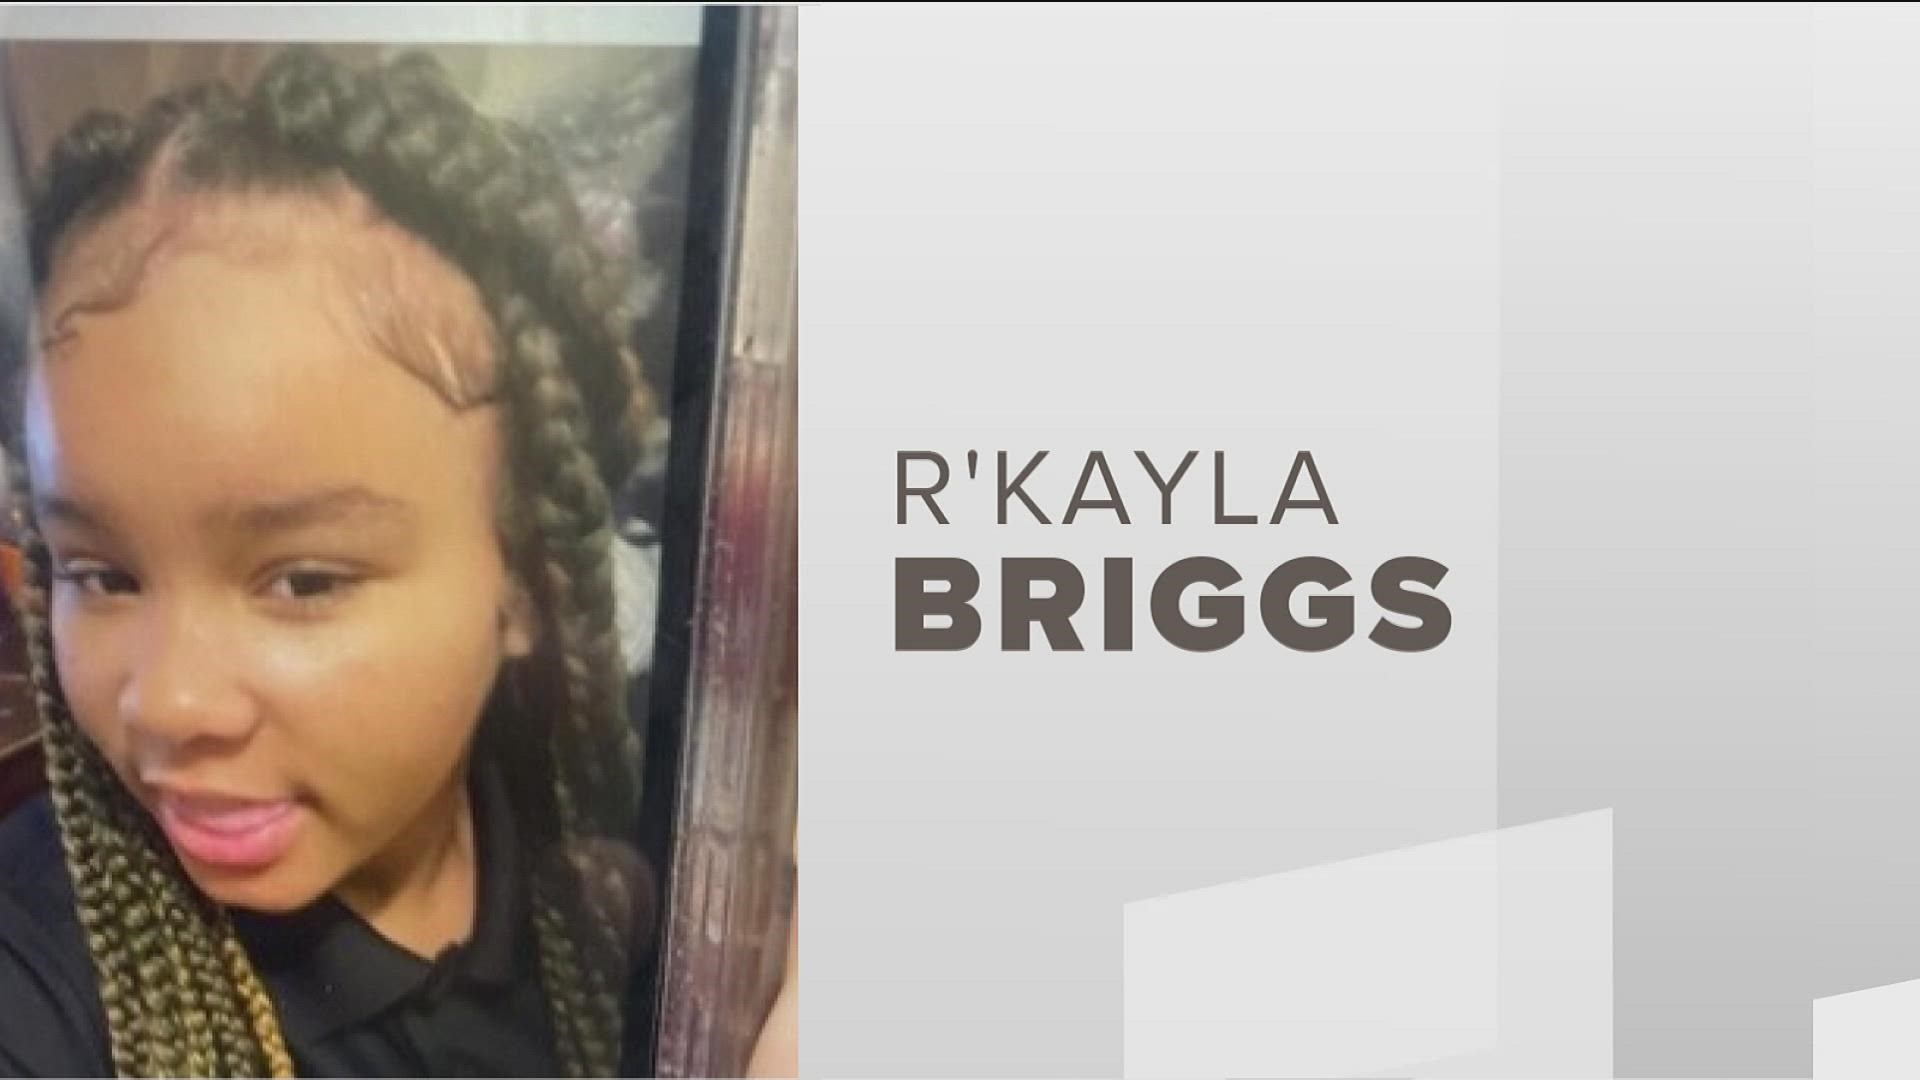 11-year-old R'Kayla Briggs may be heading to Bibb County/Macon area or in route to Texas, officers say. She was last seen leaving her Jonesboro home.